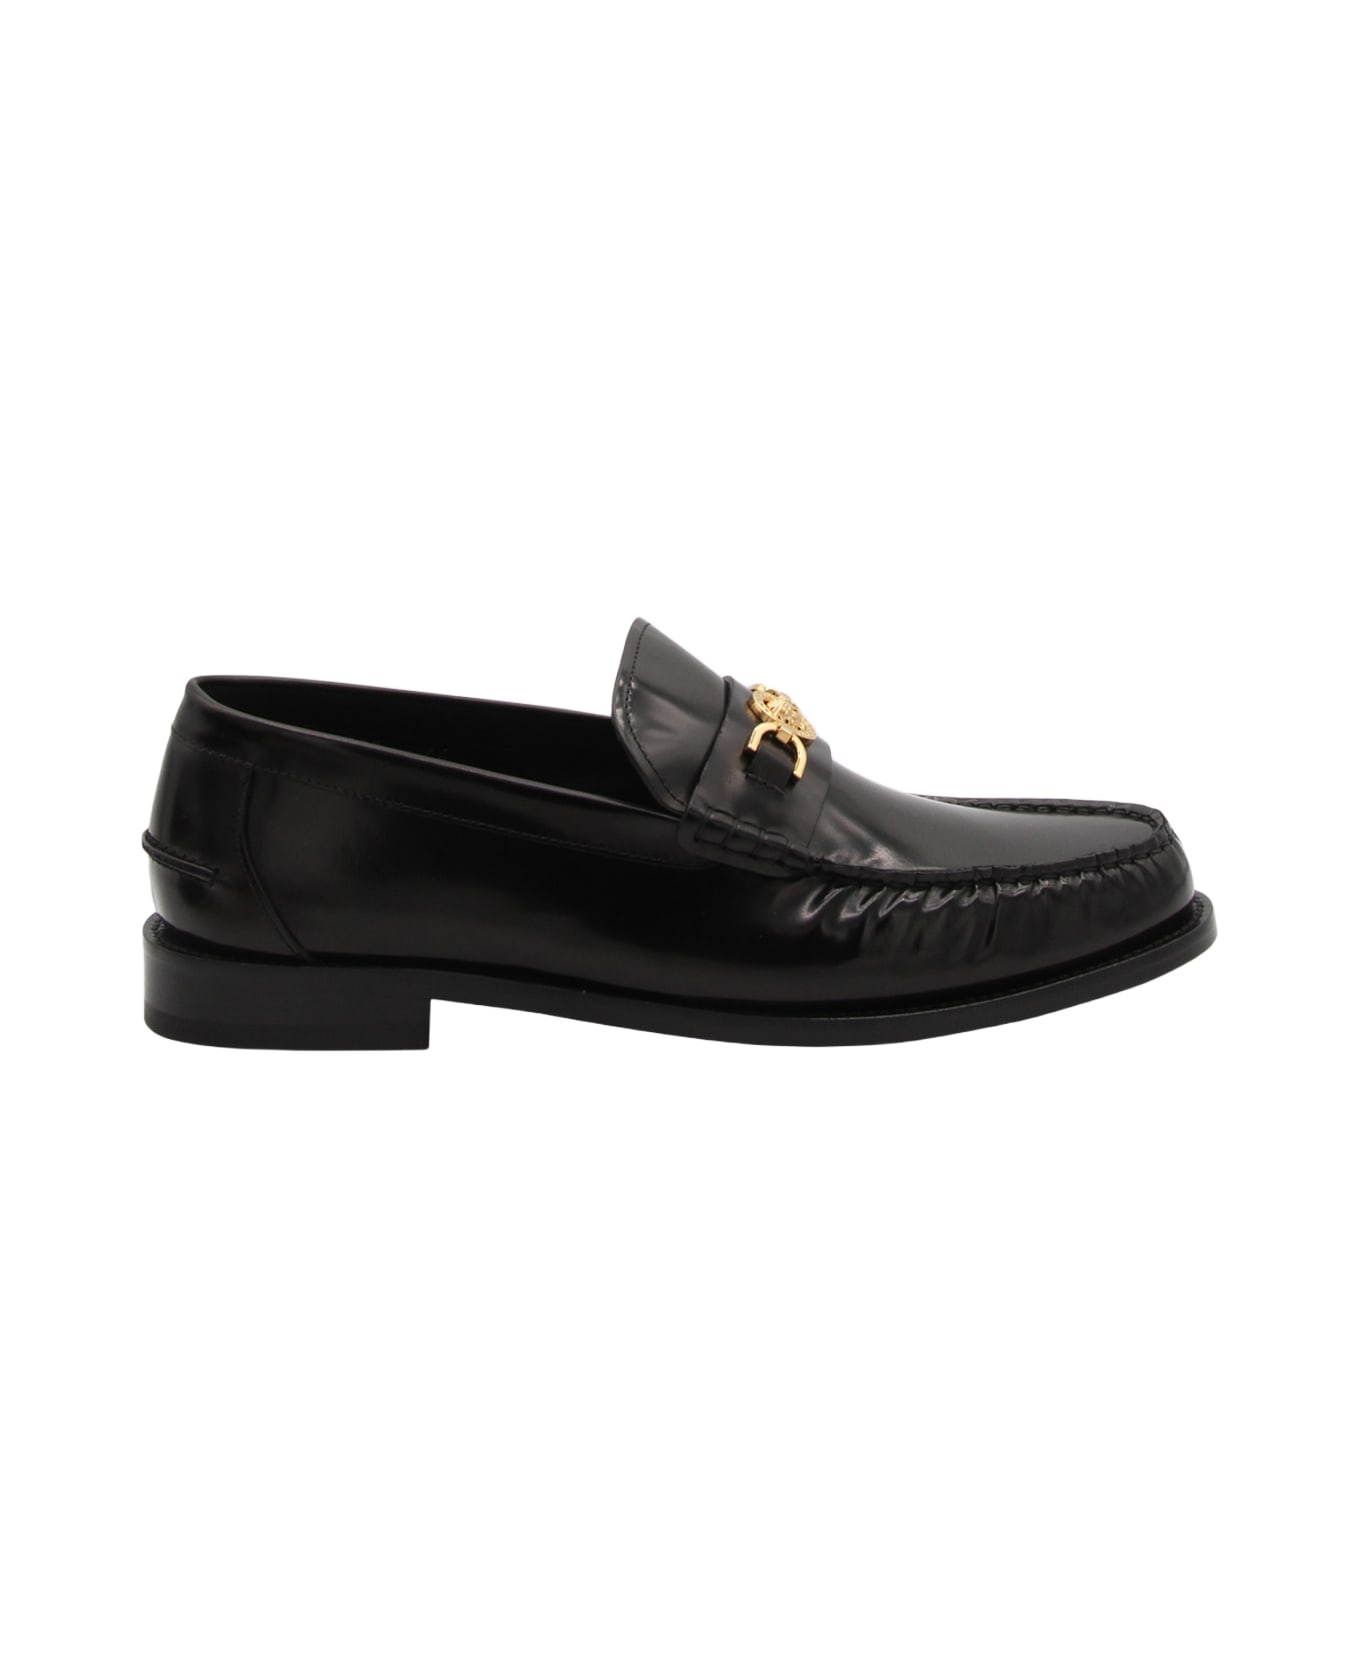 Versace Black And Gold Leather Medusa Loafers - Black